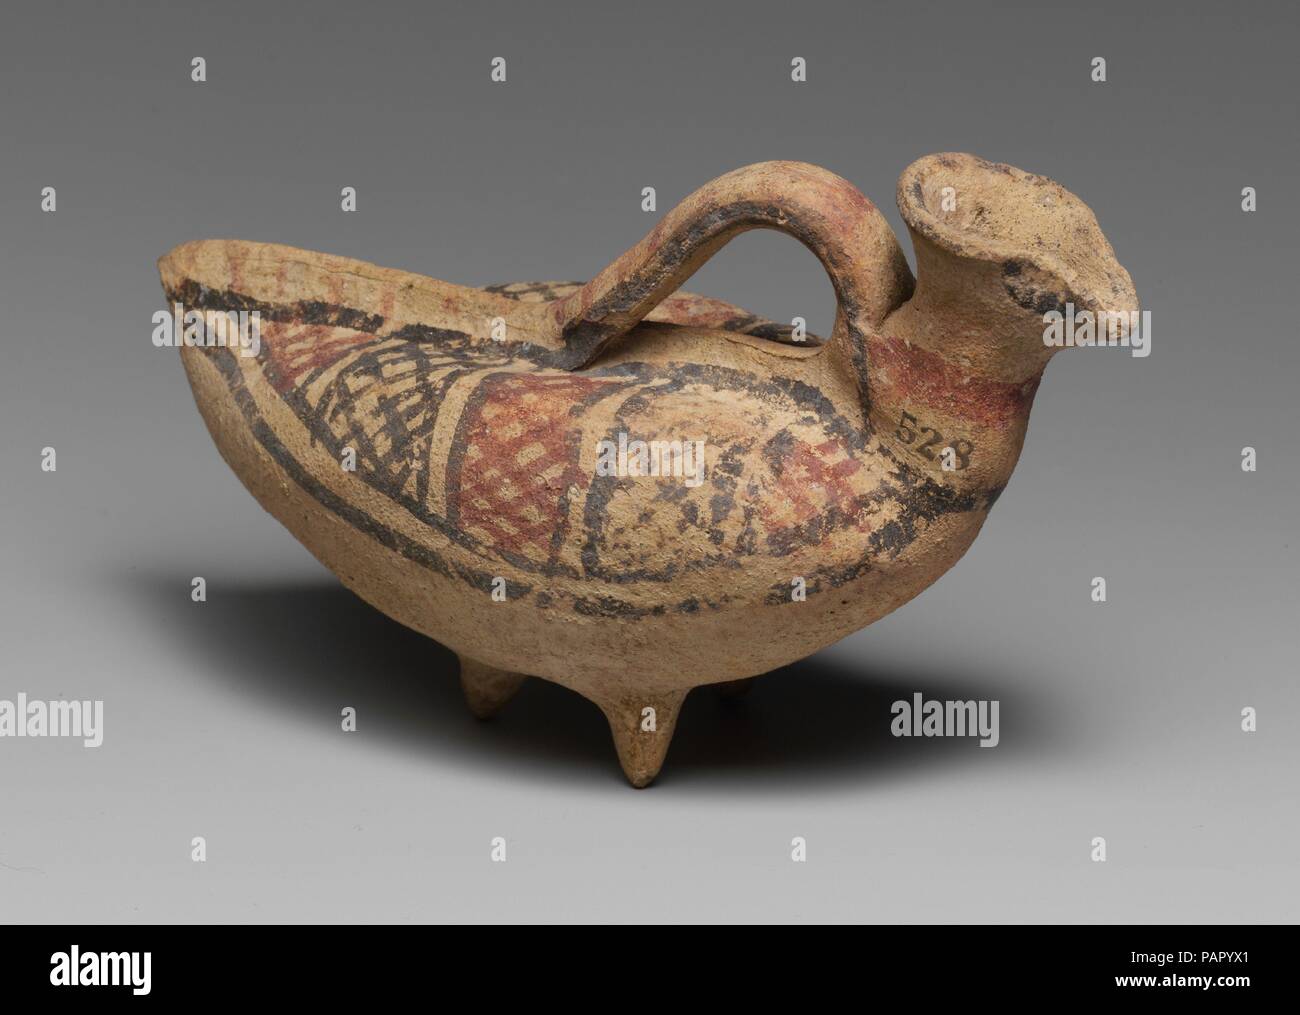 Terracotta askos (flask with a spout and handle over the top) in the form of a bird. Culture: Cypriot. Dimensions: 3 3/8in. (8.6cm). Date: 750-600 B.C..  Three feet with geometric ornament. Museum: Metropolitan Museum of Art, New York, USA. Stock Photo